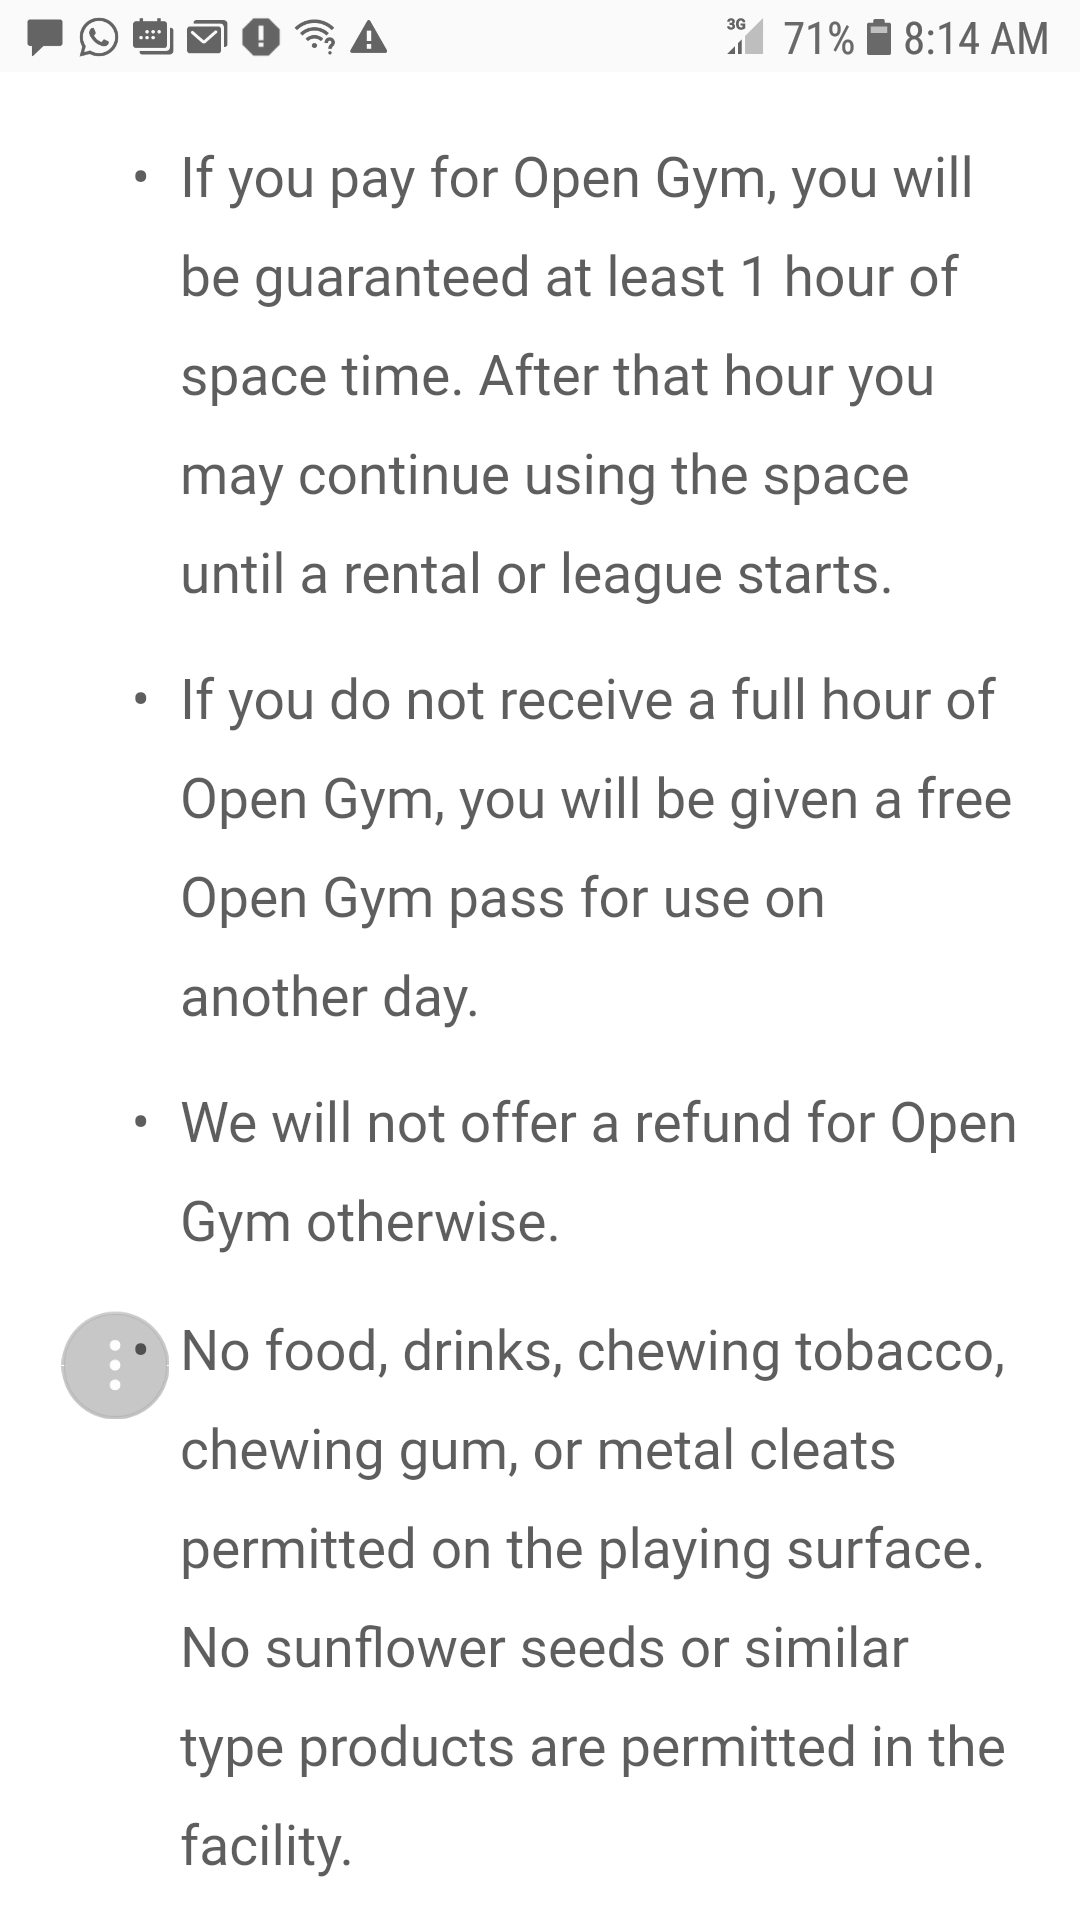 The rules from their website